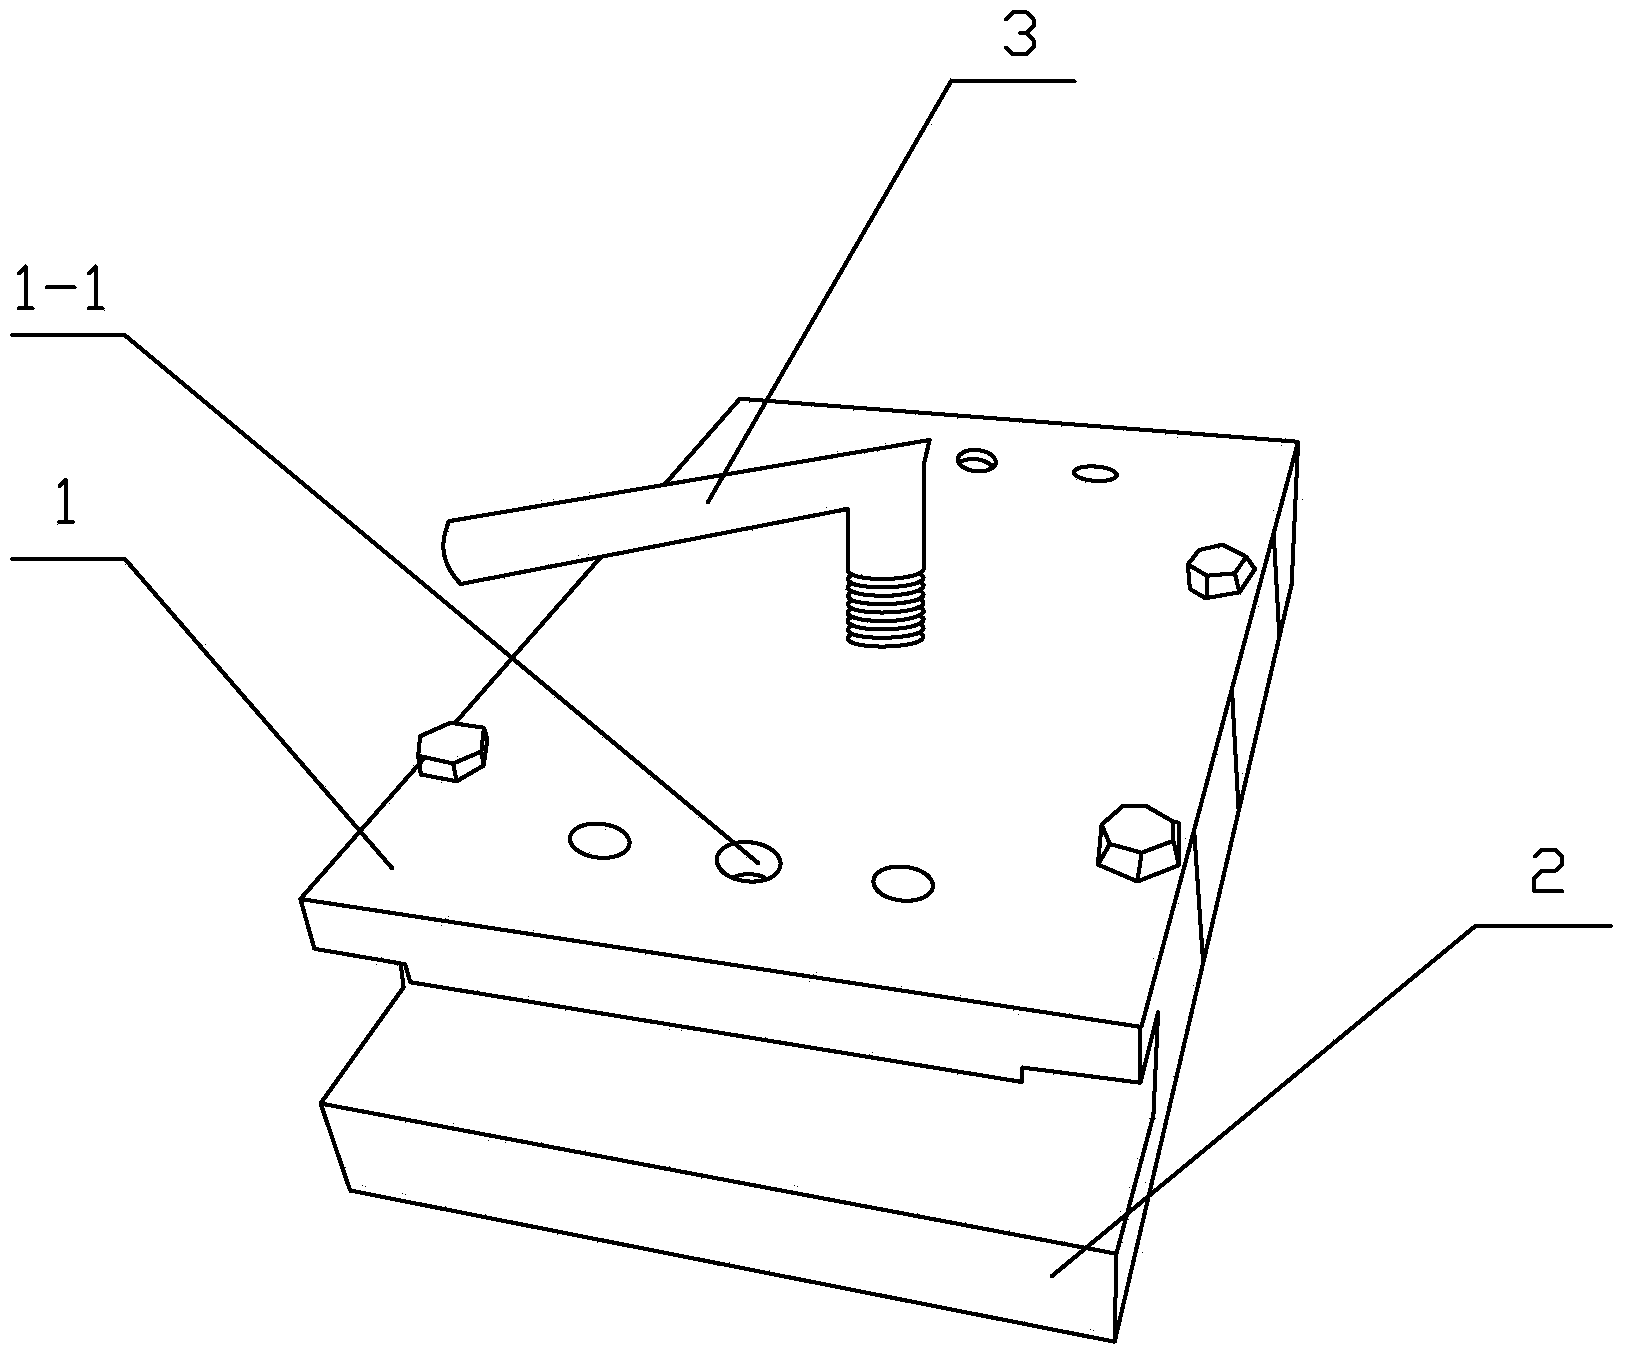 Bloated brick perforation tool